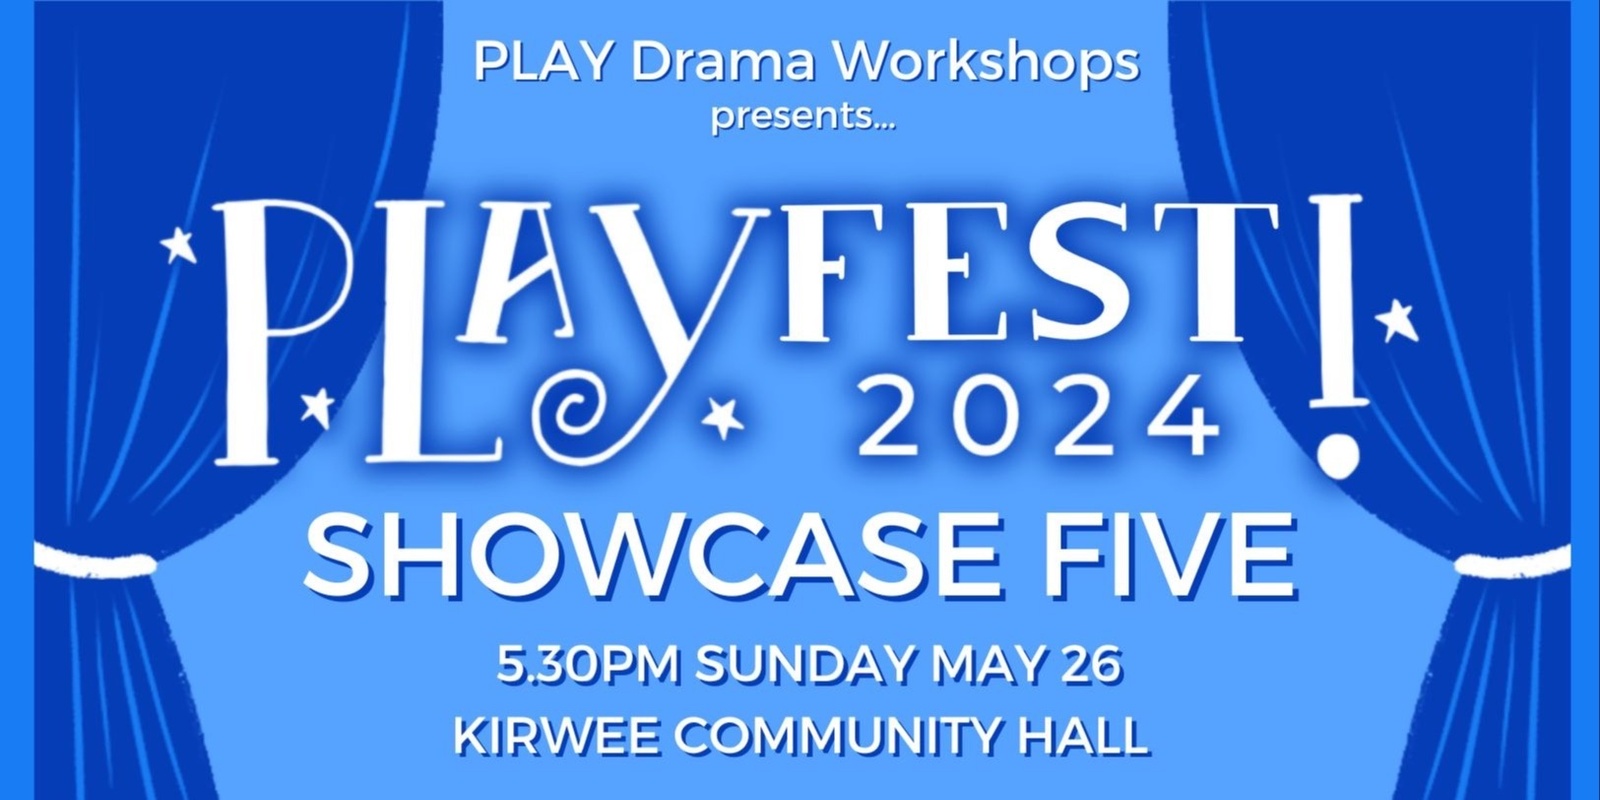 Banner image for PLAYFest Showcase FIVE 